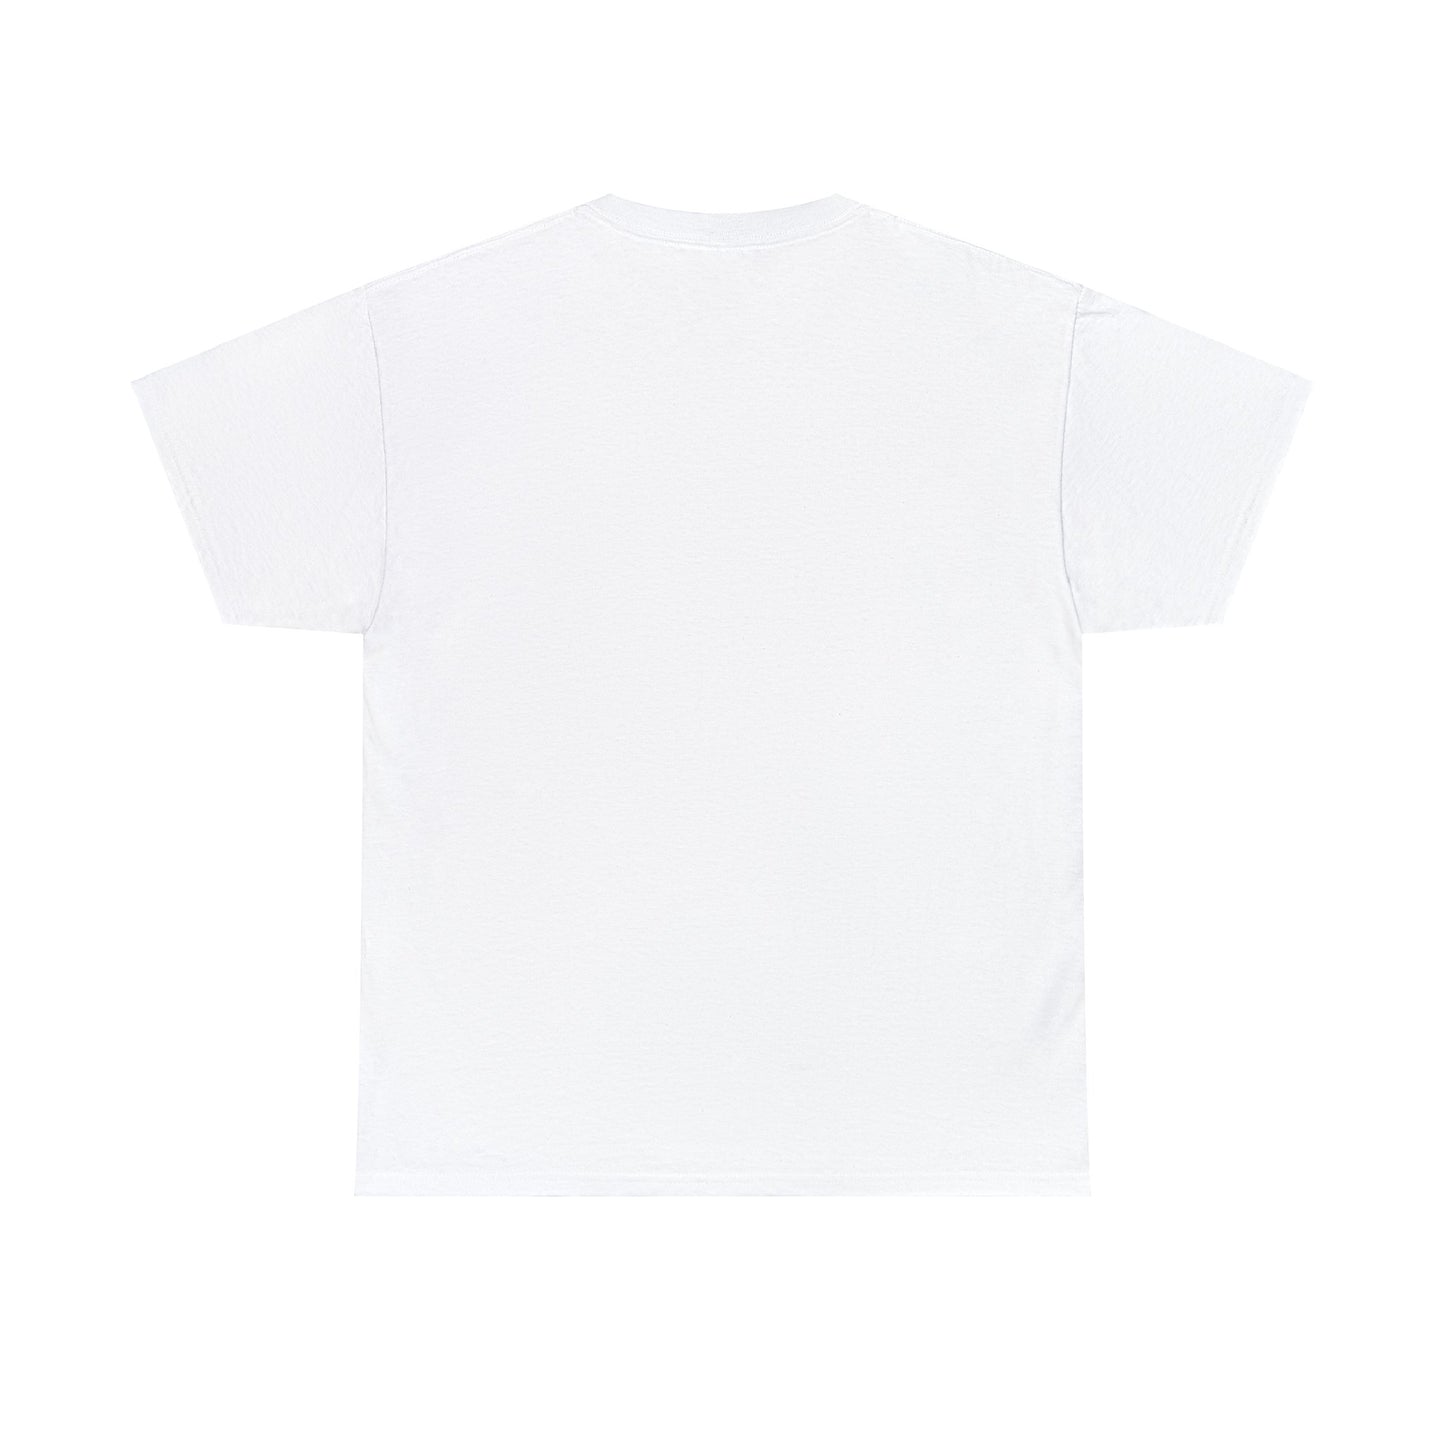 UPW ROSTER '22 PRINTED TEE